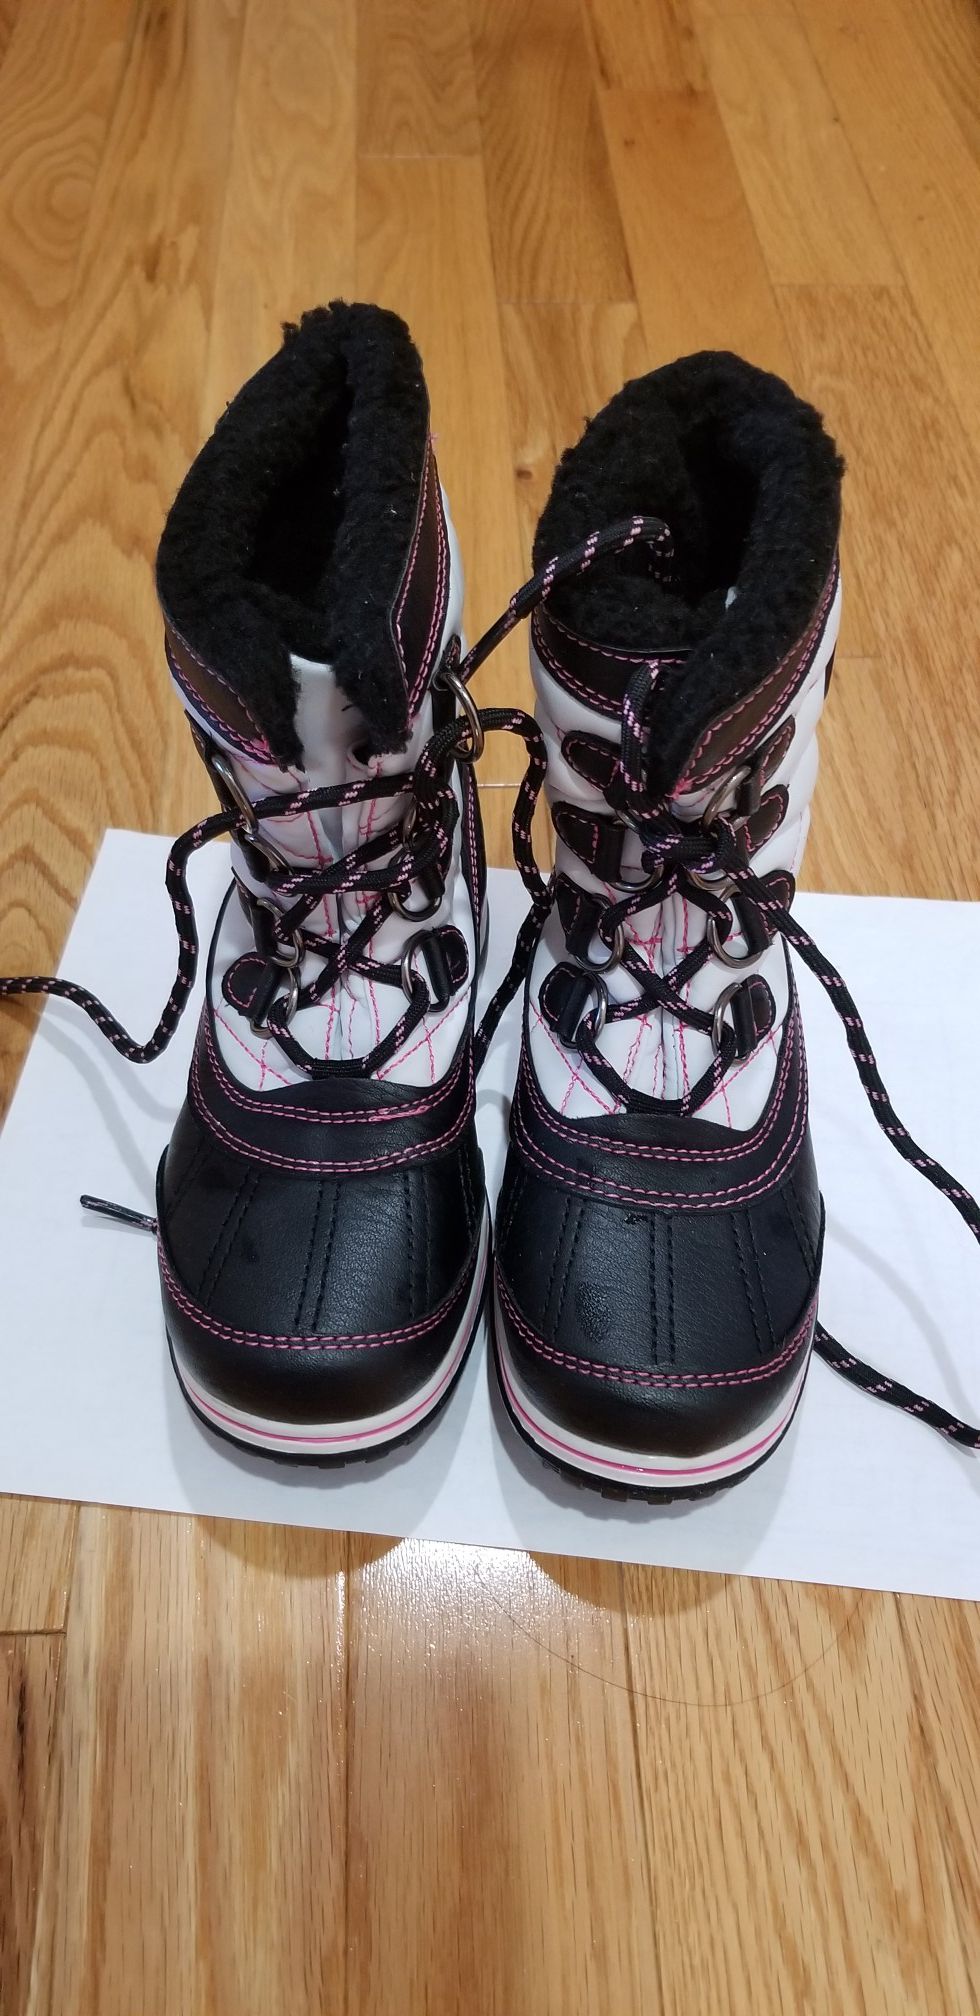 Kids Totes Winter Warm Snow Boots for girls. Size 13